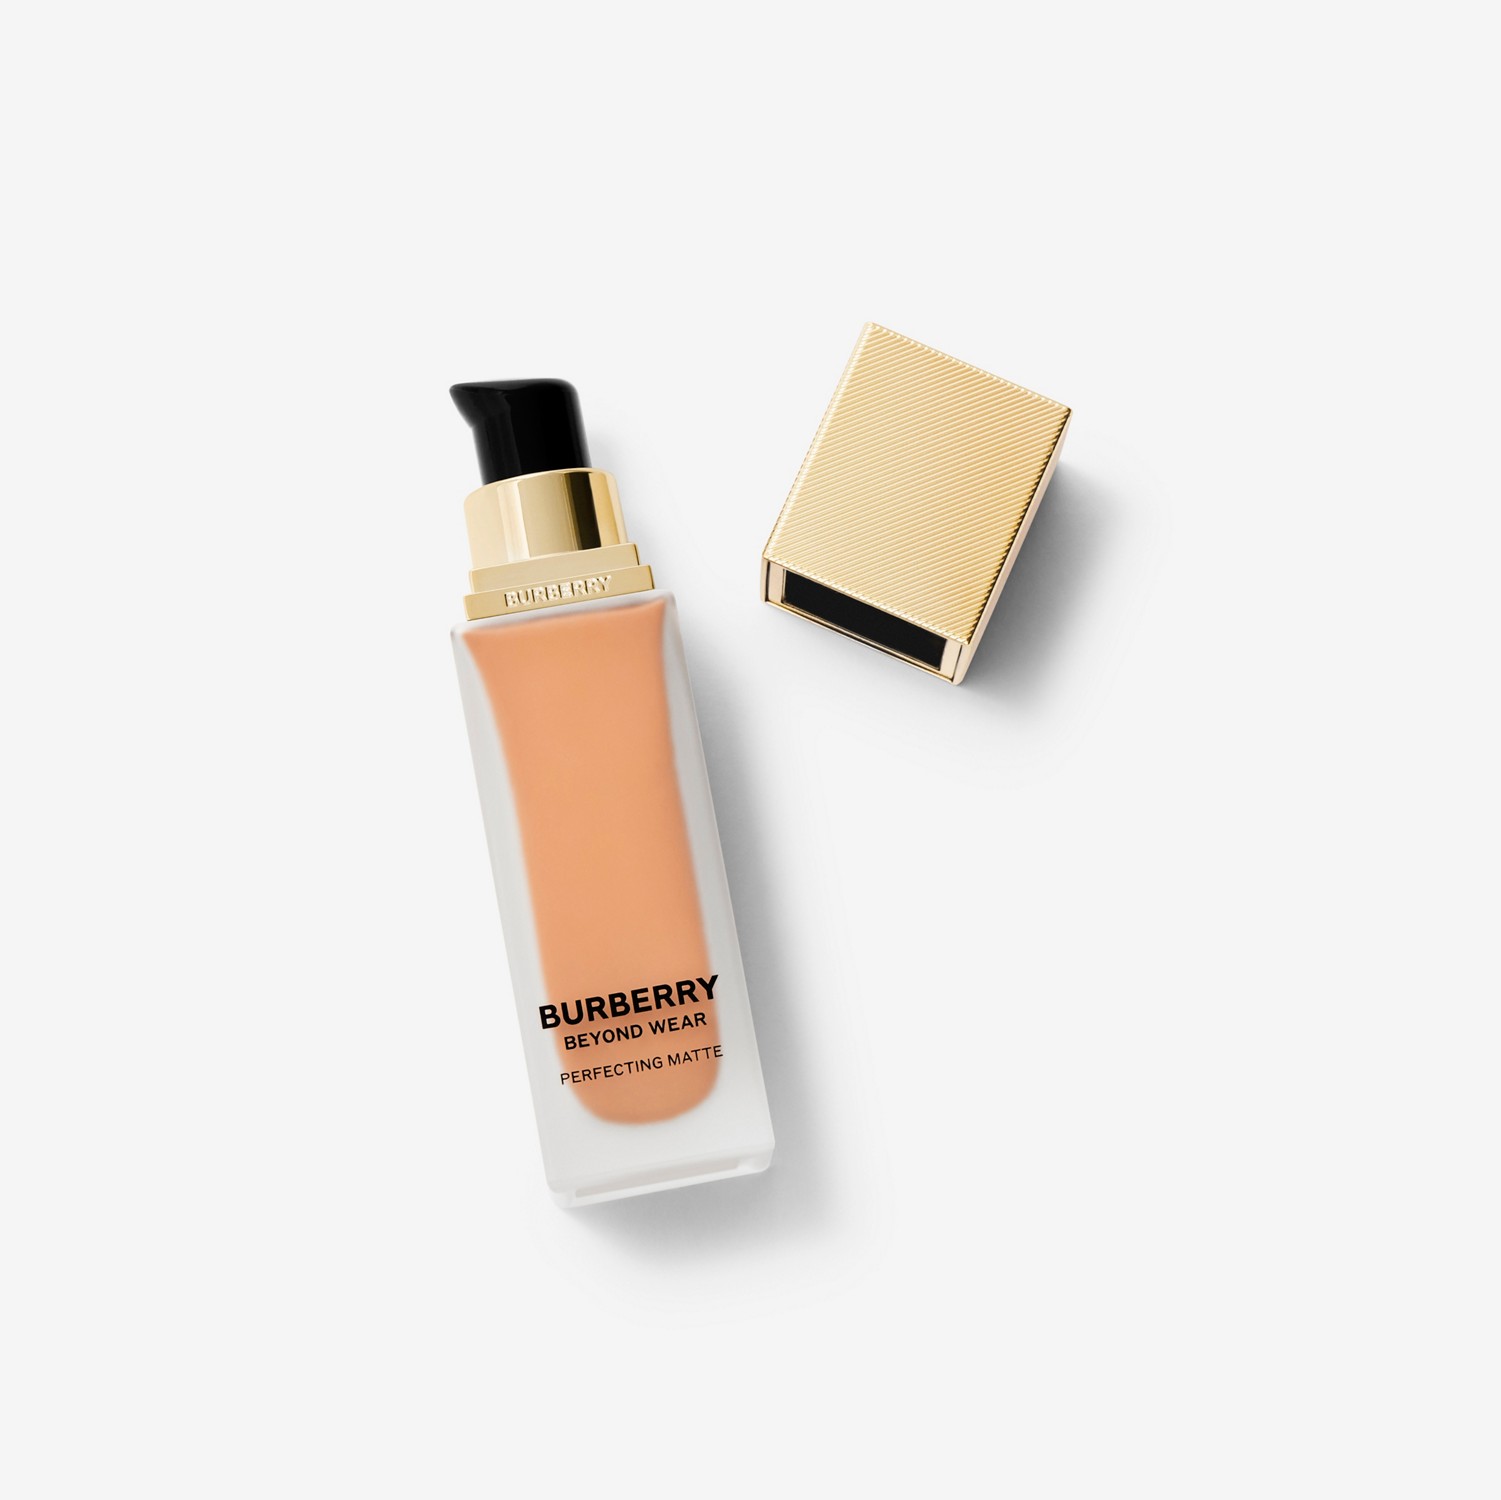 Beyond Wear Perfecting Matte Foundation – 70 Medium Cool - Donna | Sito ufficiale Burberry®